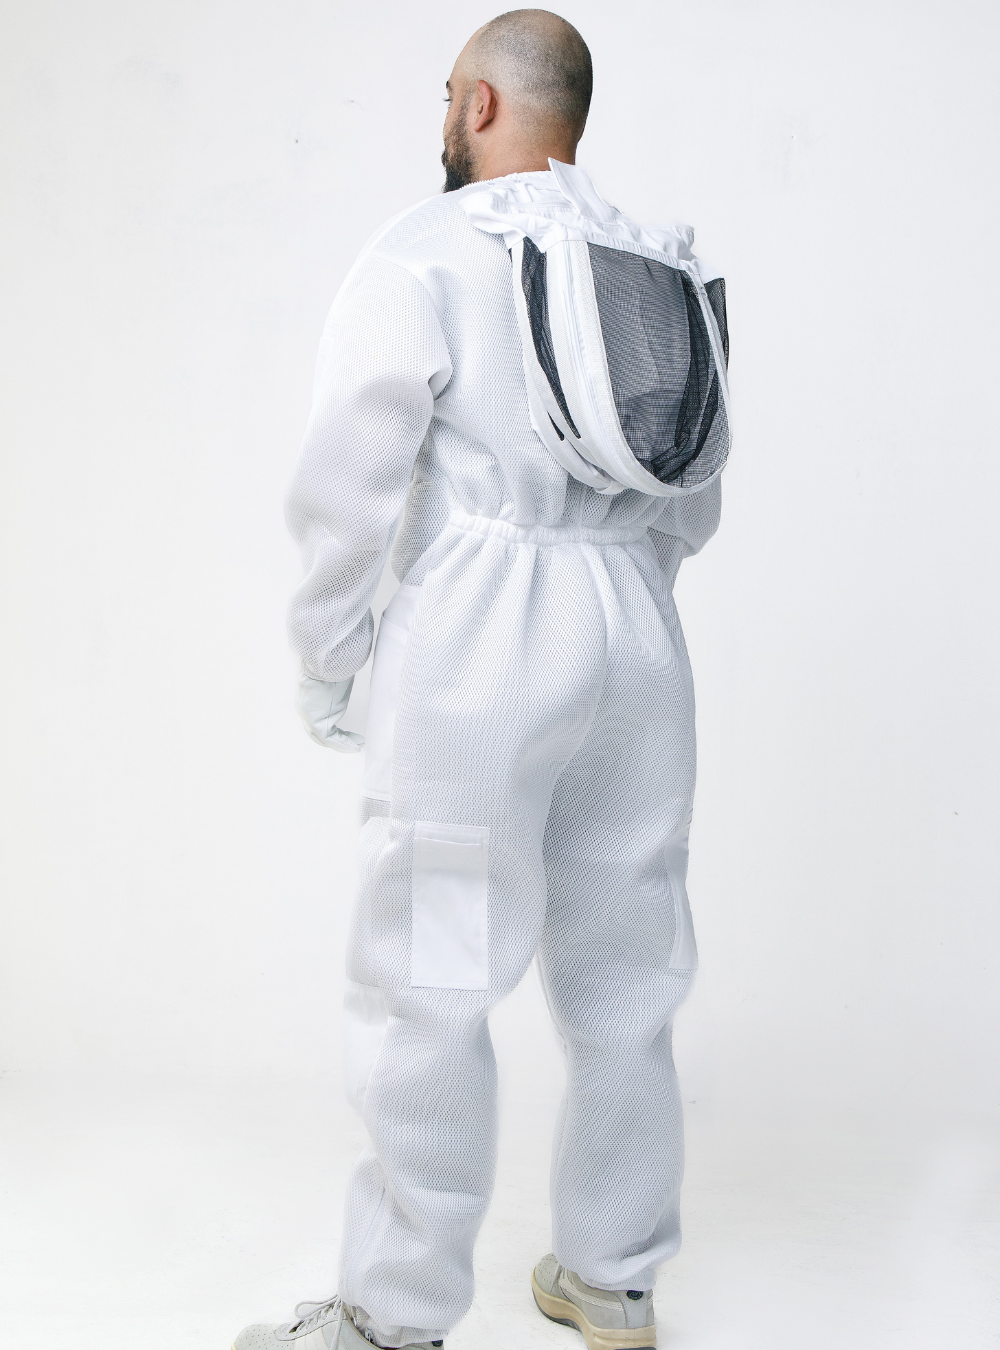 AirFlow Pro beekeeping suit equipped with Gloves and Detachable Fencing Veil Side Look.